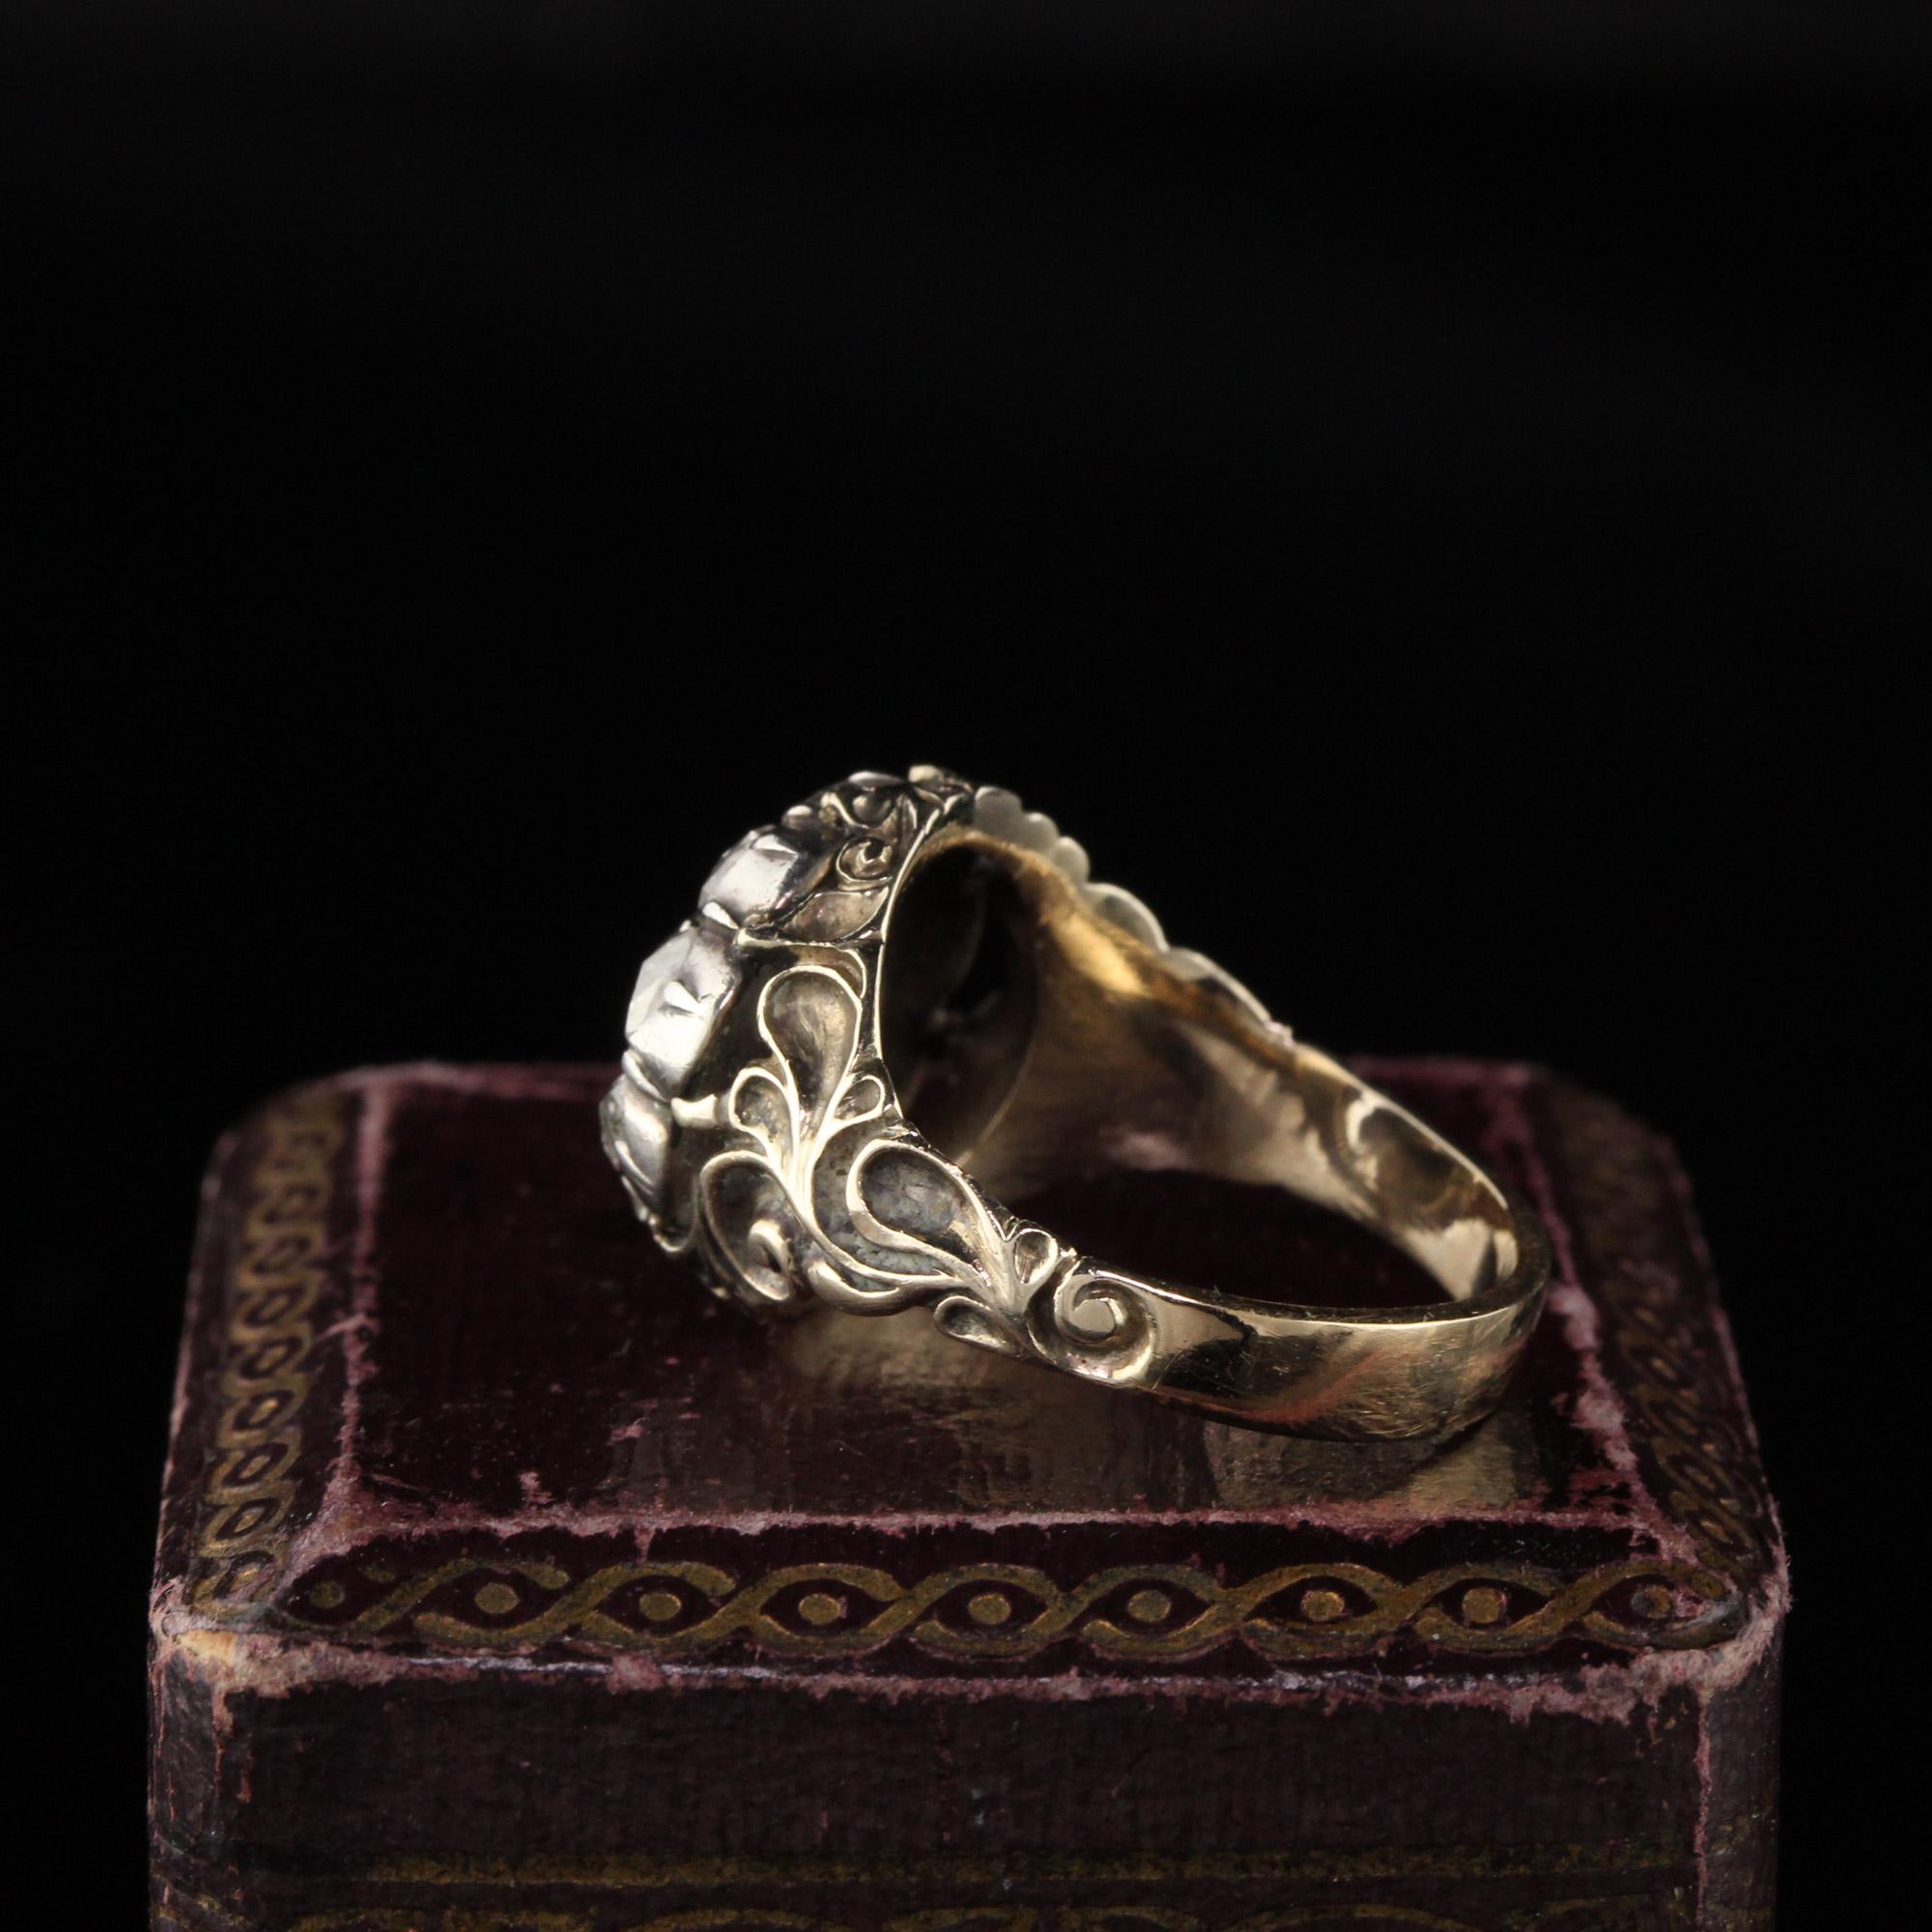 Beautiful antique engagement ring with rose cut diamonds. 

Item #R0577

Metal: 18K Yellow Gold & Silver 

Weight: 5.6 Grams

Total Diamond Weight: Approximately 2.50 cts

Diamond Color: H

Diamond Clarity: VS2

Ring Size: 7.25 

This ring can be